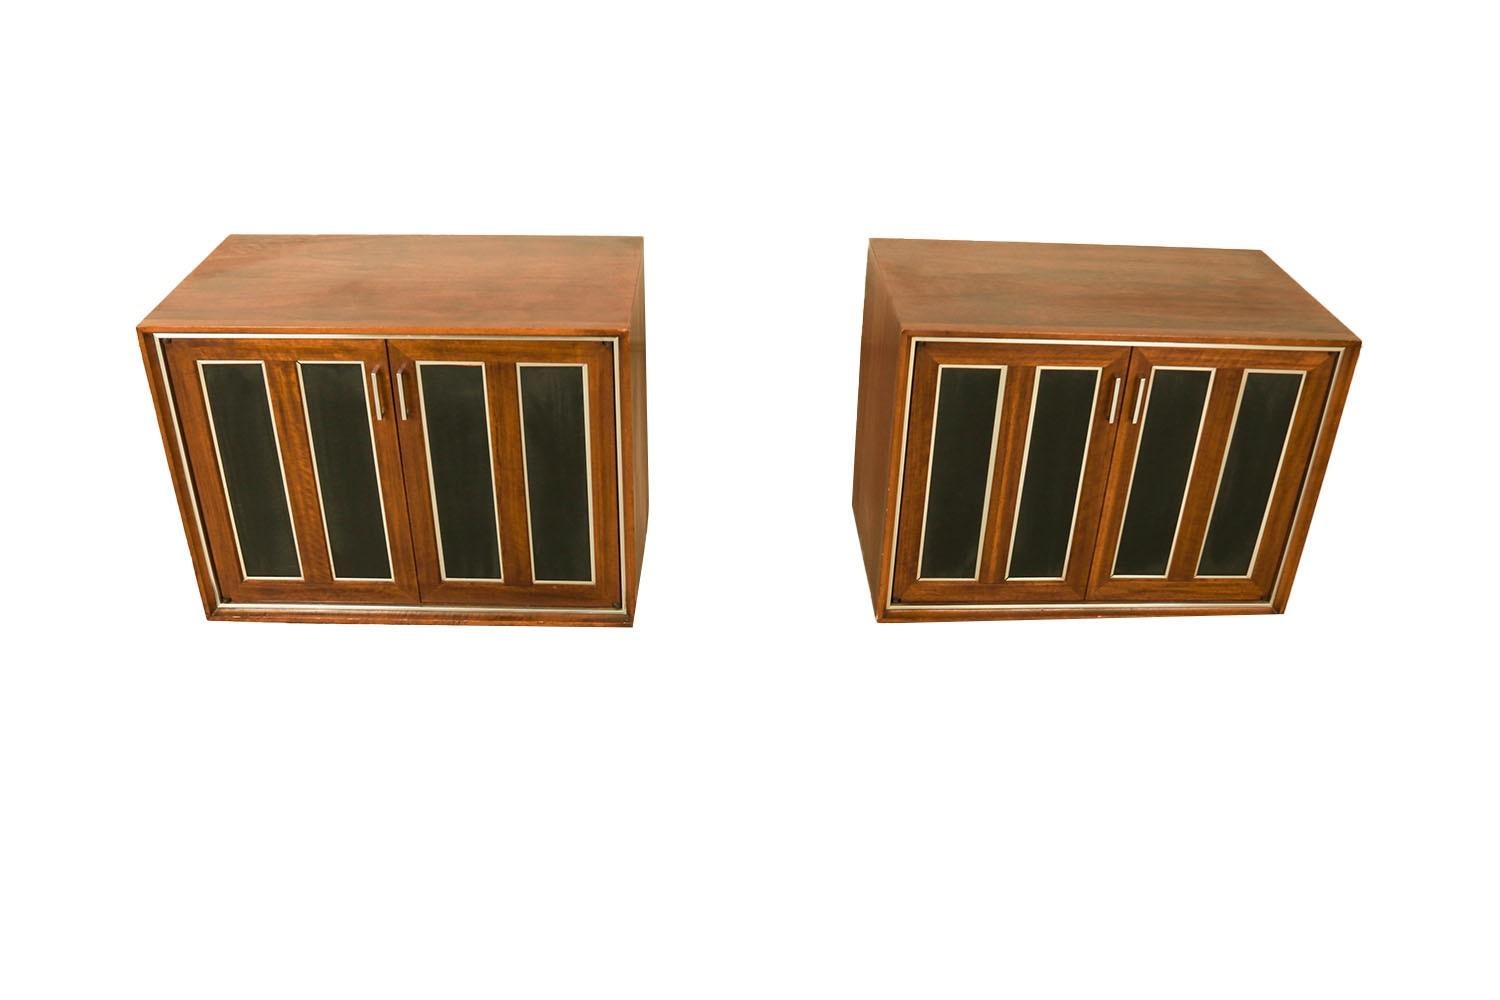 Extraordinary pair of Mid-Century Modern double door cabinets /nightstands by Lane Furniture. This retro pair was constructed with top-of-the-line hardware, and excellently crafted woodwork. Each features a walnut wood frame with a rectangular top,